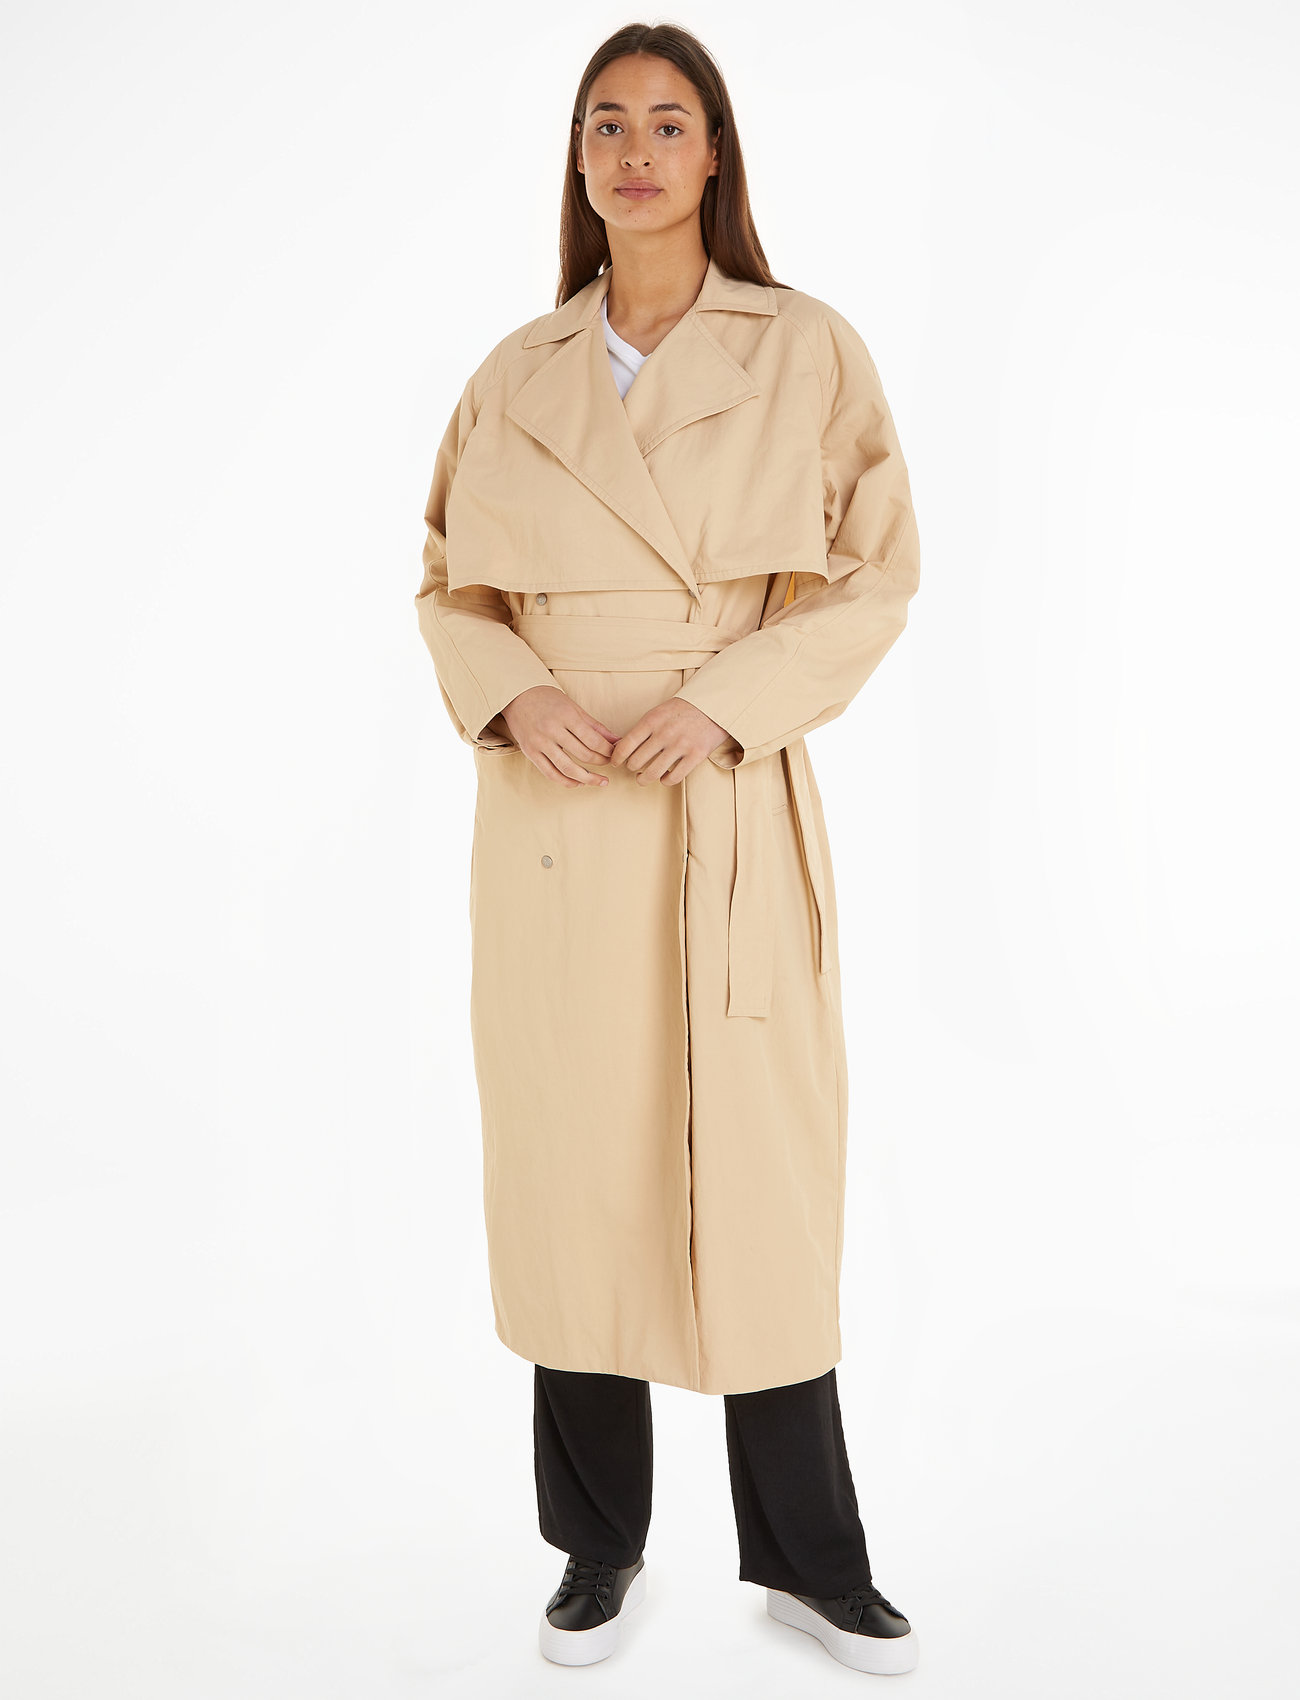 returns Klein Klein coats Jeans Trench Fast Trench and delivery €. easy Calvin 212.42 Calvin from Coat online Boozt.com. - Belted at Buy Jeans